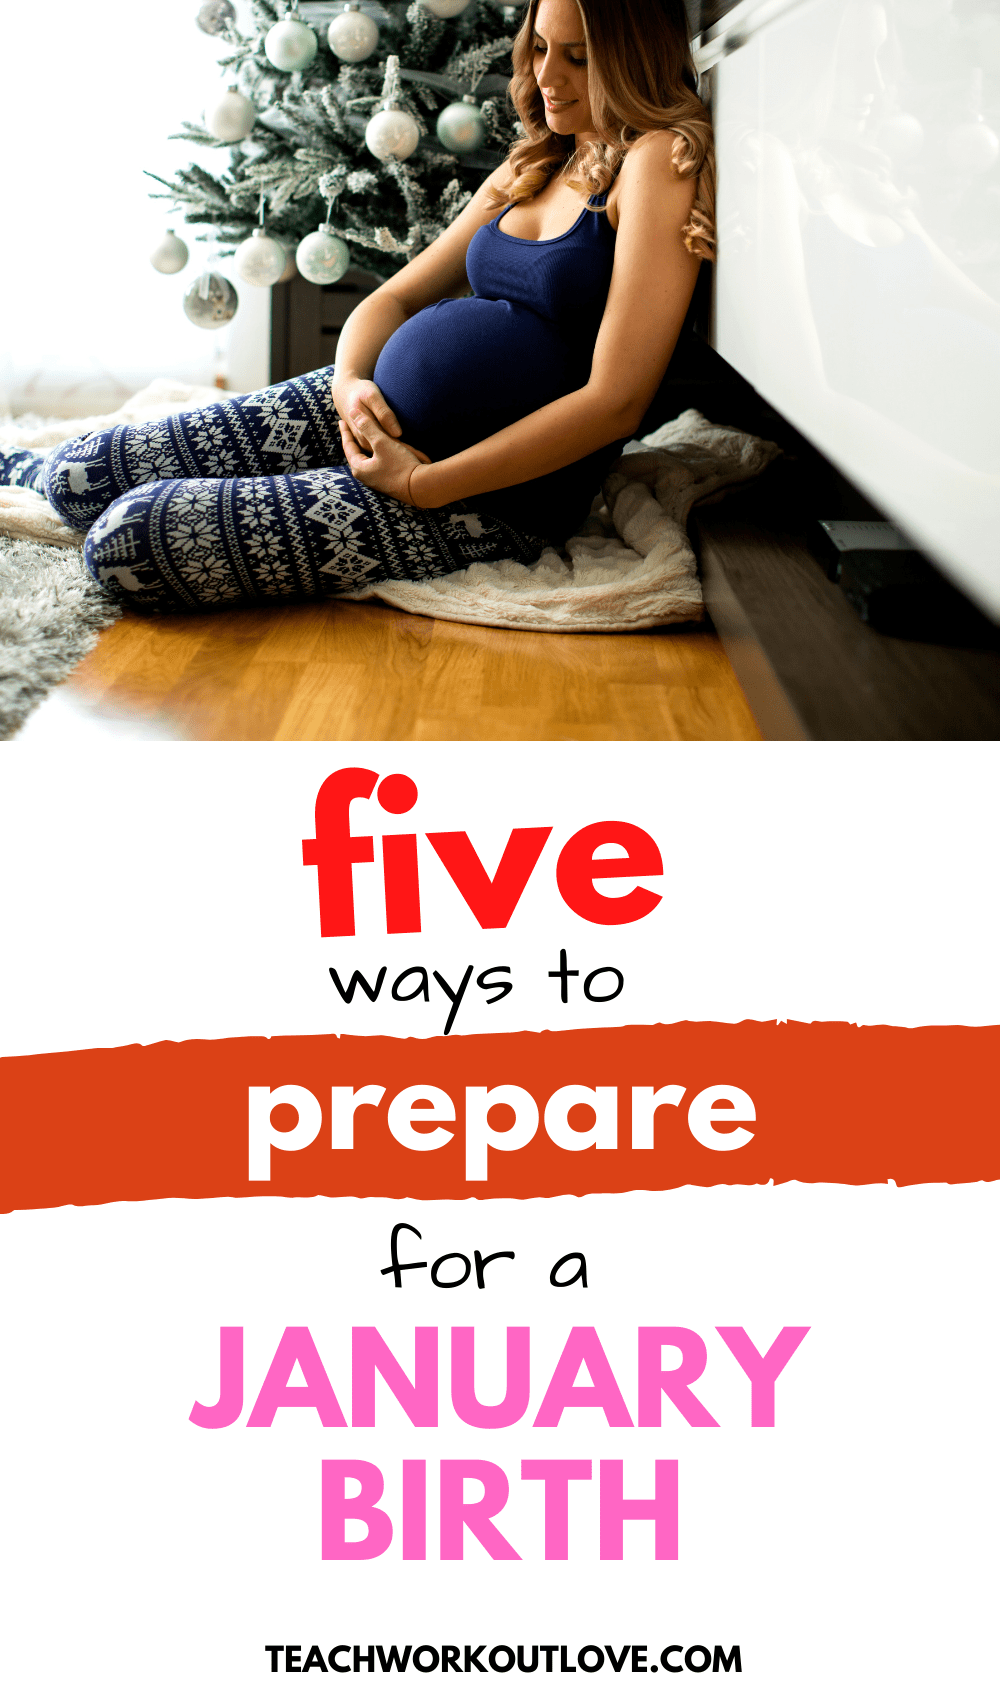 You may feel a little overwhelmed if you're due in January. There's no reason to stress. These five tips will help you prepare.